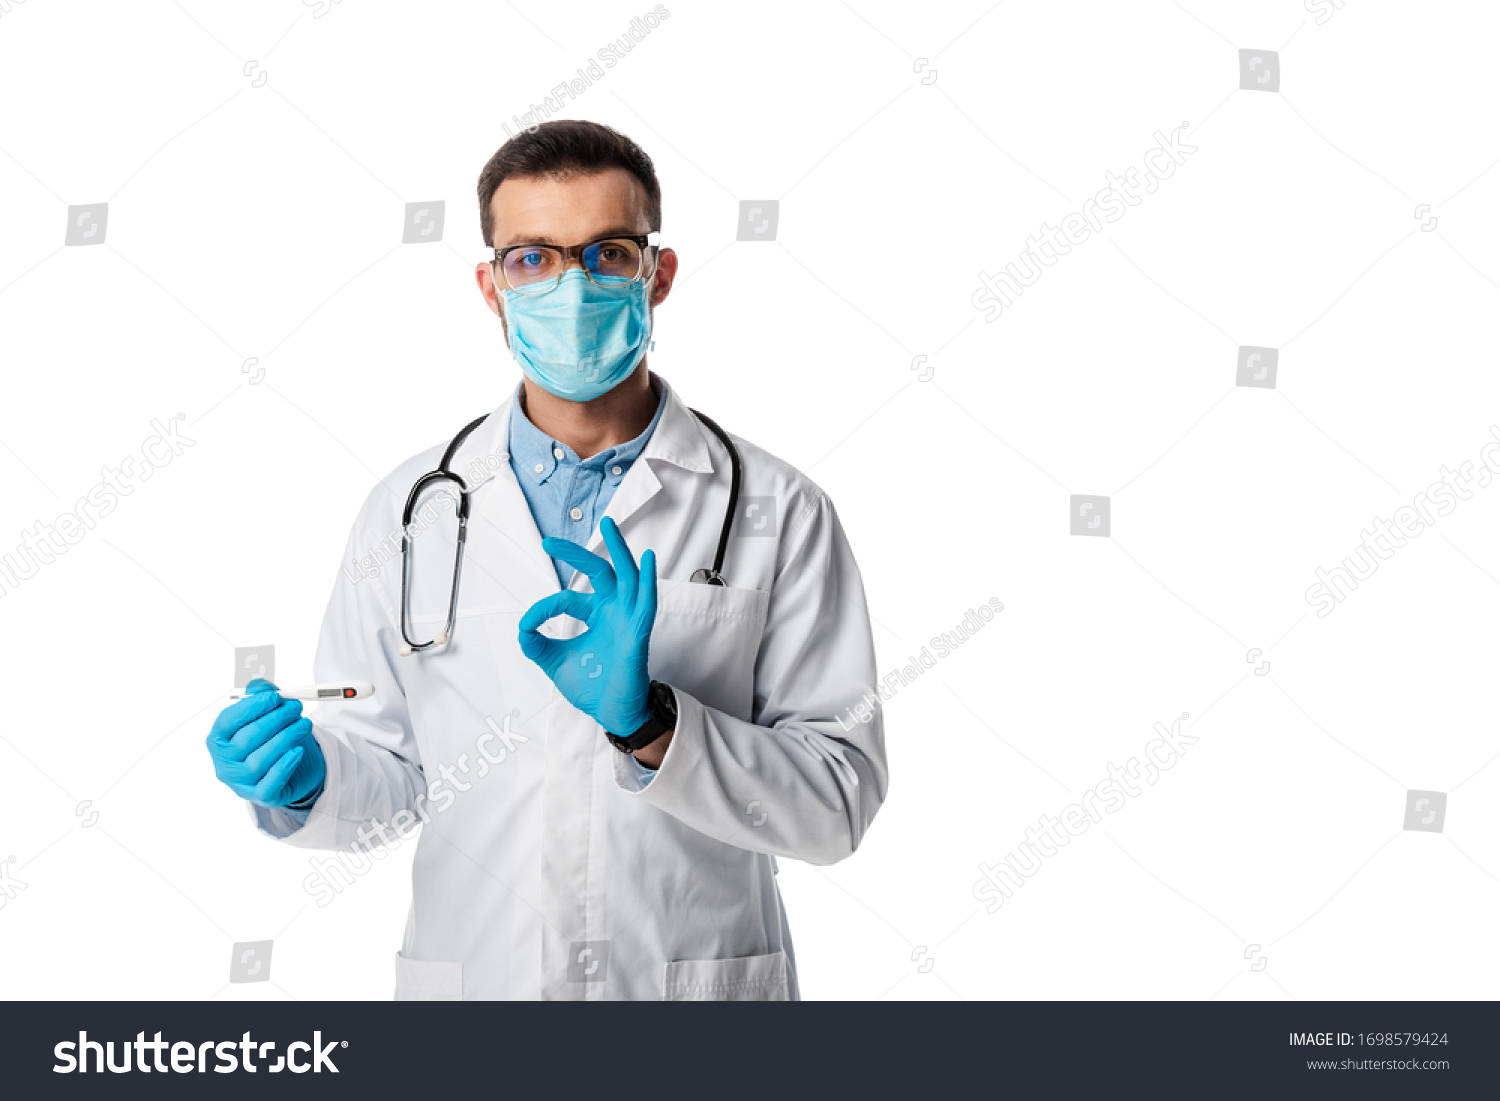 doctor in medical mask and white coat holding digital thermometer and showing ok sign isolated on white #1698579424